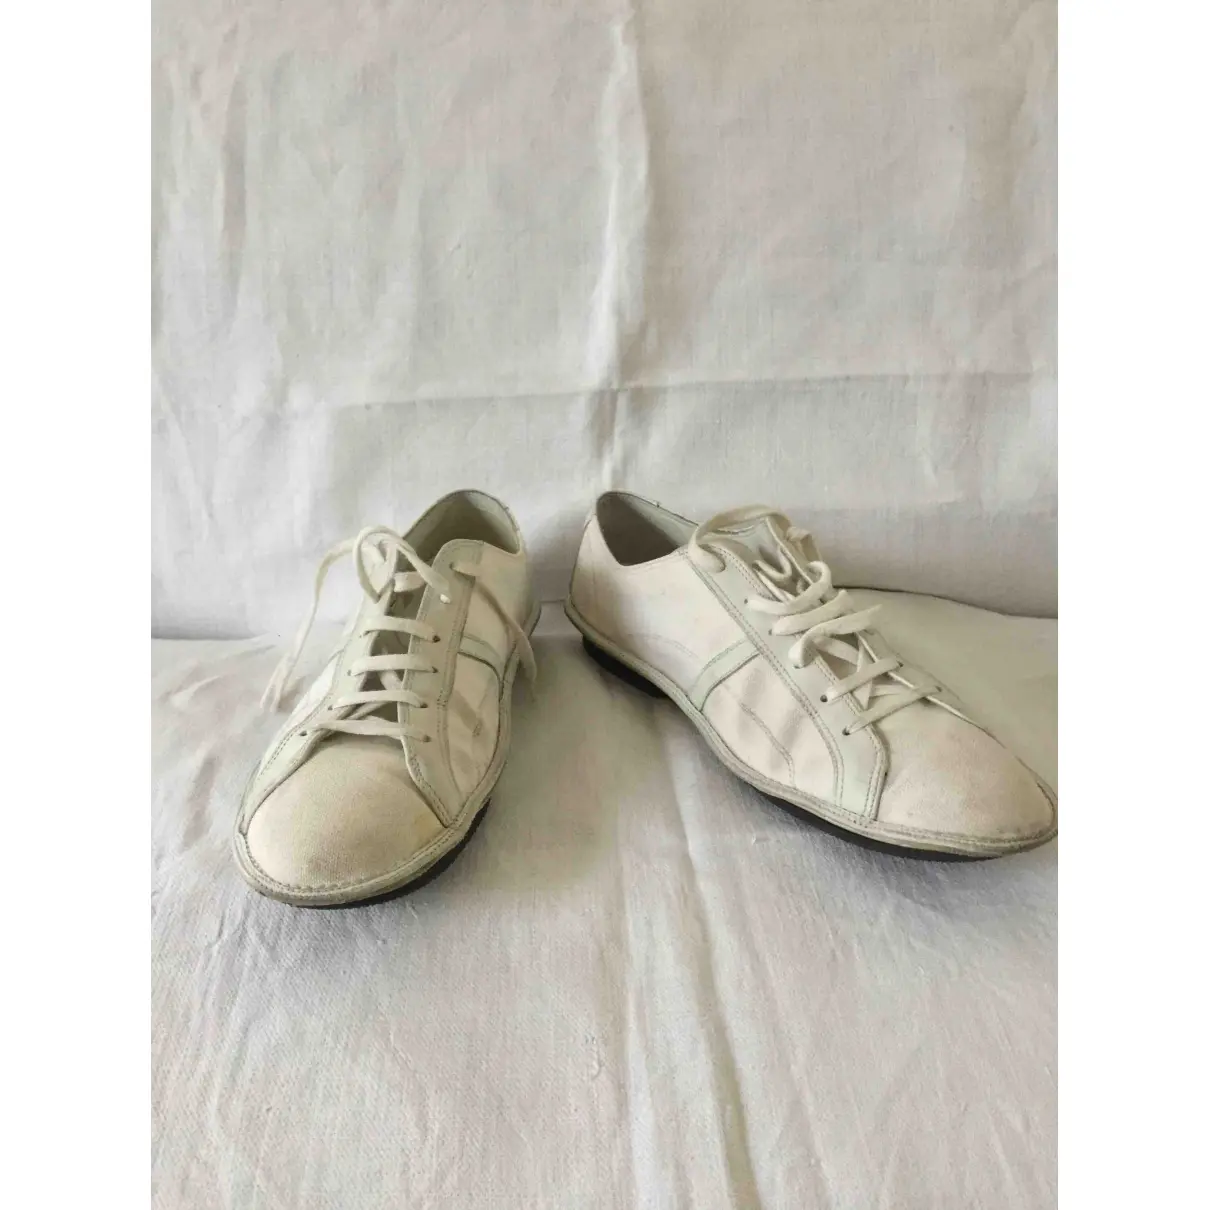 Buy Helmut Lang Cloth low trainers online